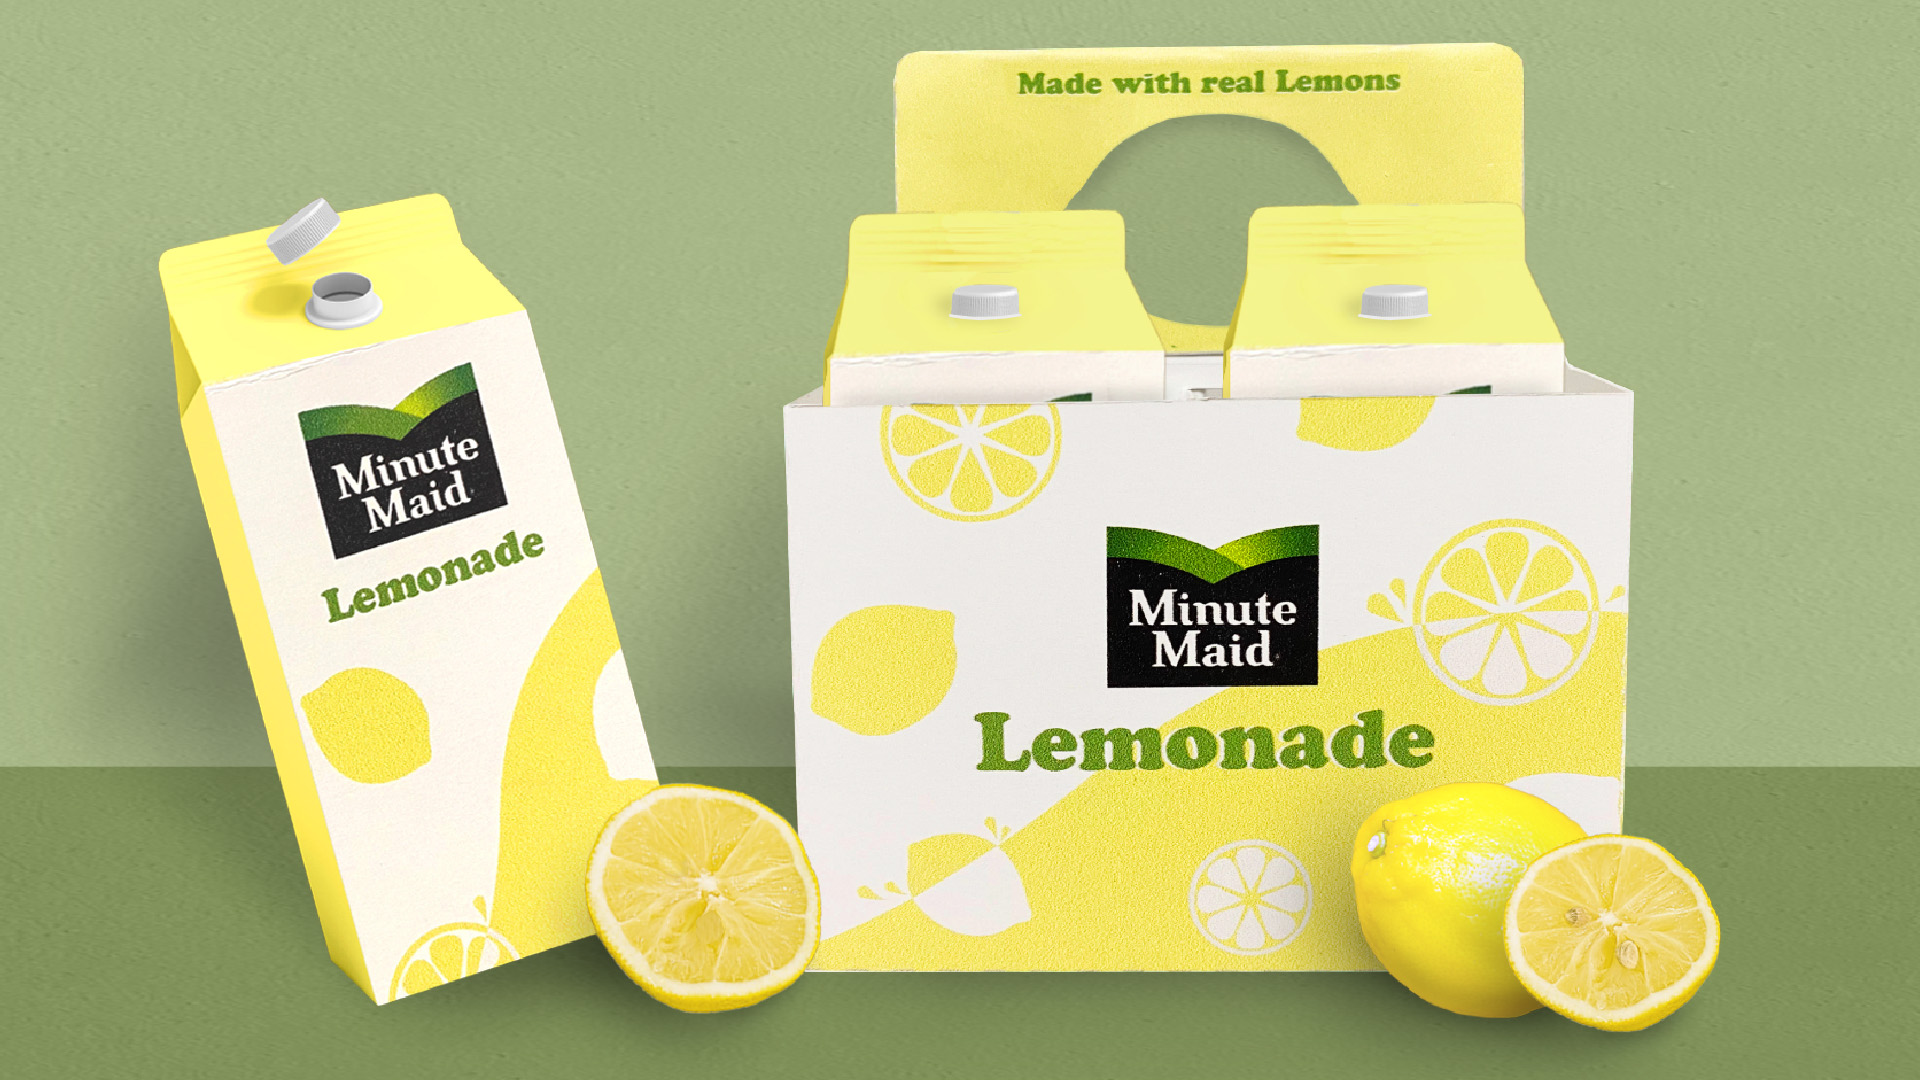 “Minute Maid Redesign” / “Minute Maid Redesign”, Packaging, Adobe Illustrator and Photoshop, printed packaging material, 2022. The Minute Maid package redesign focuses on a bright and fun design to highlight the refreshing lemonade brand.